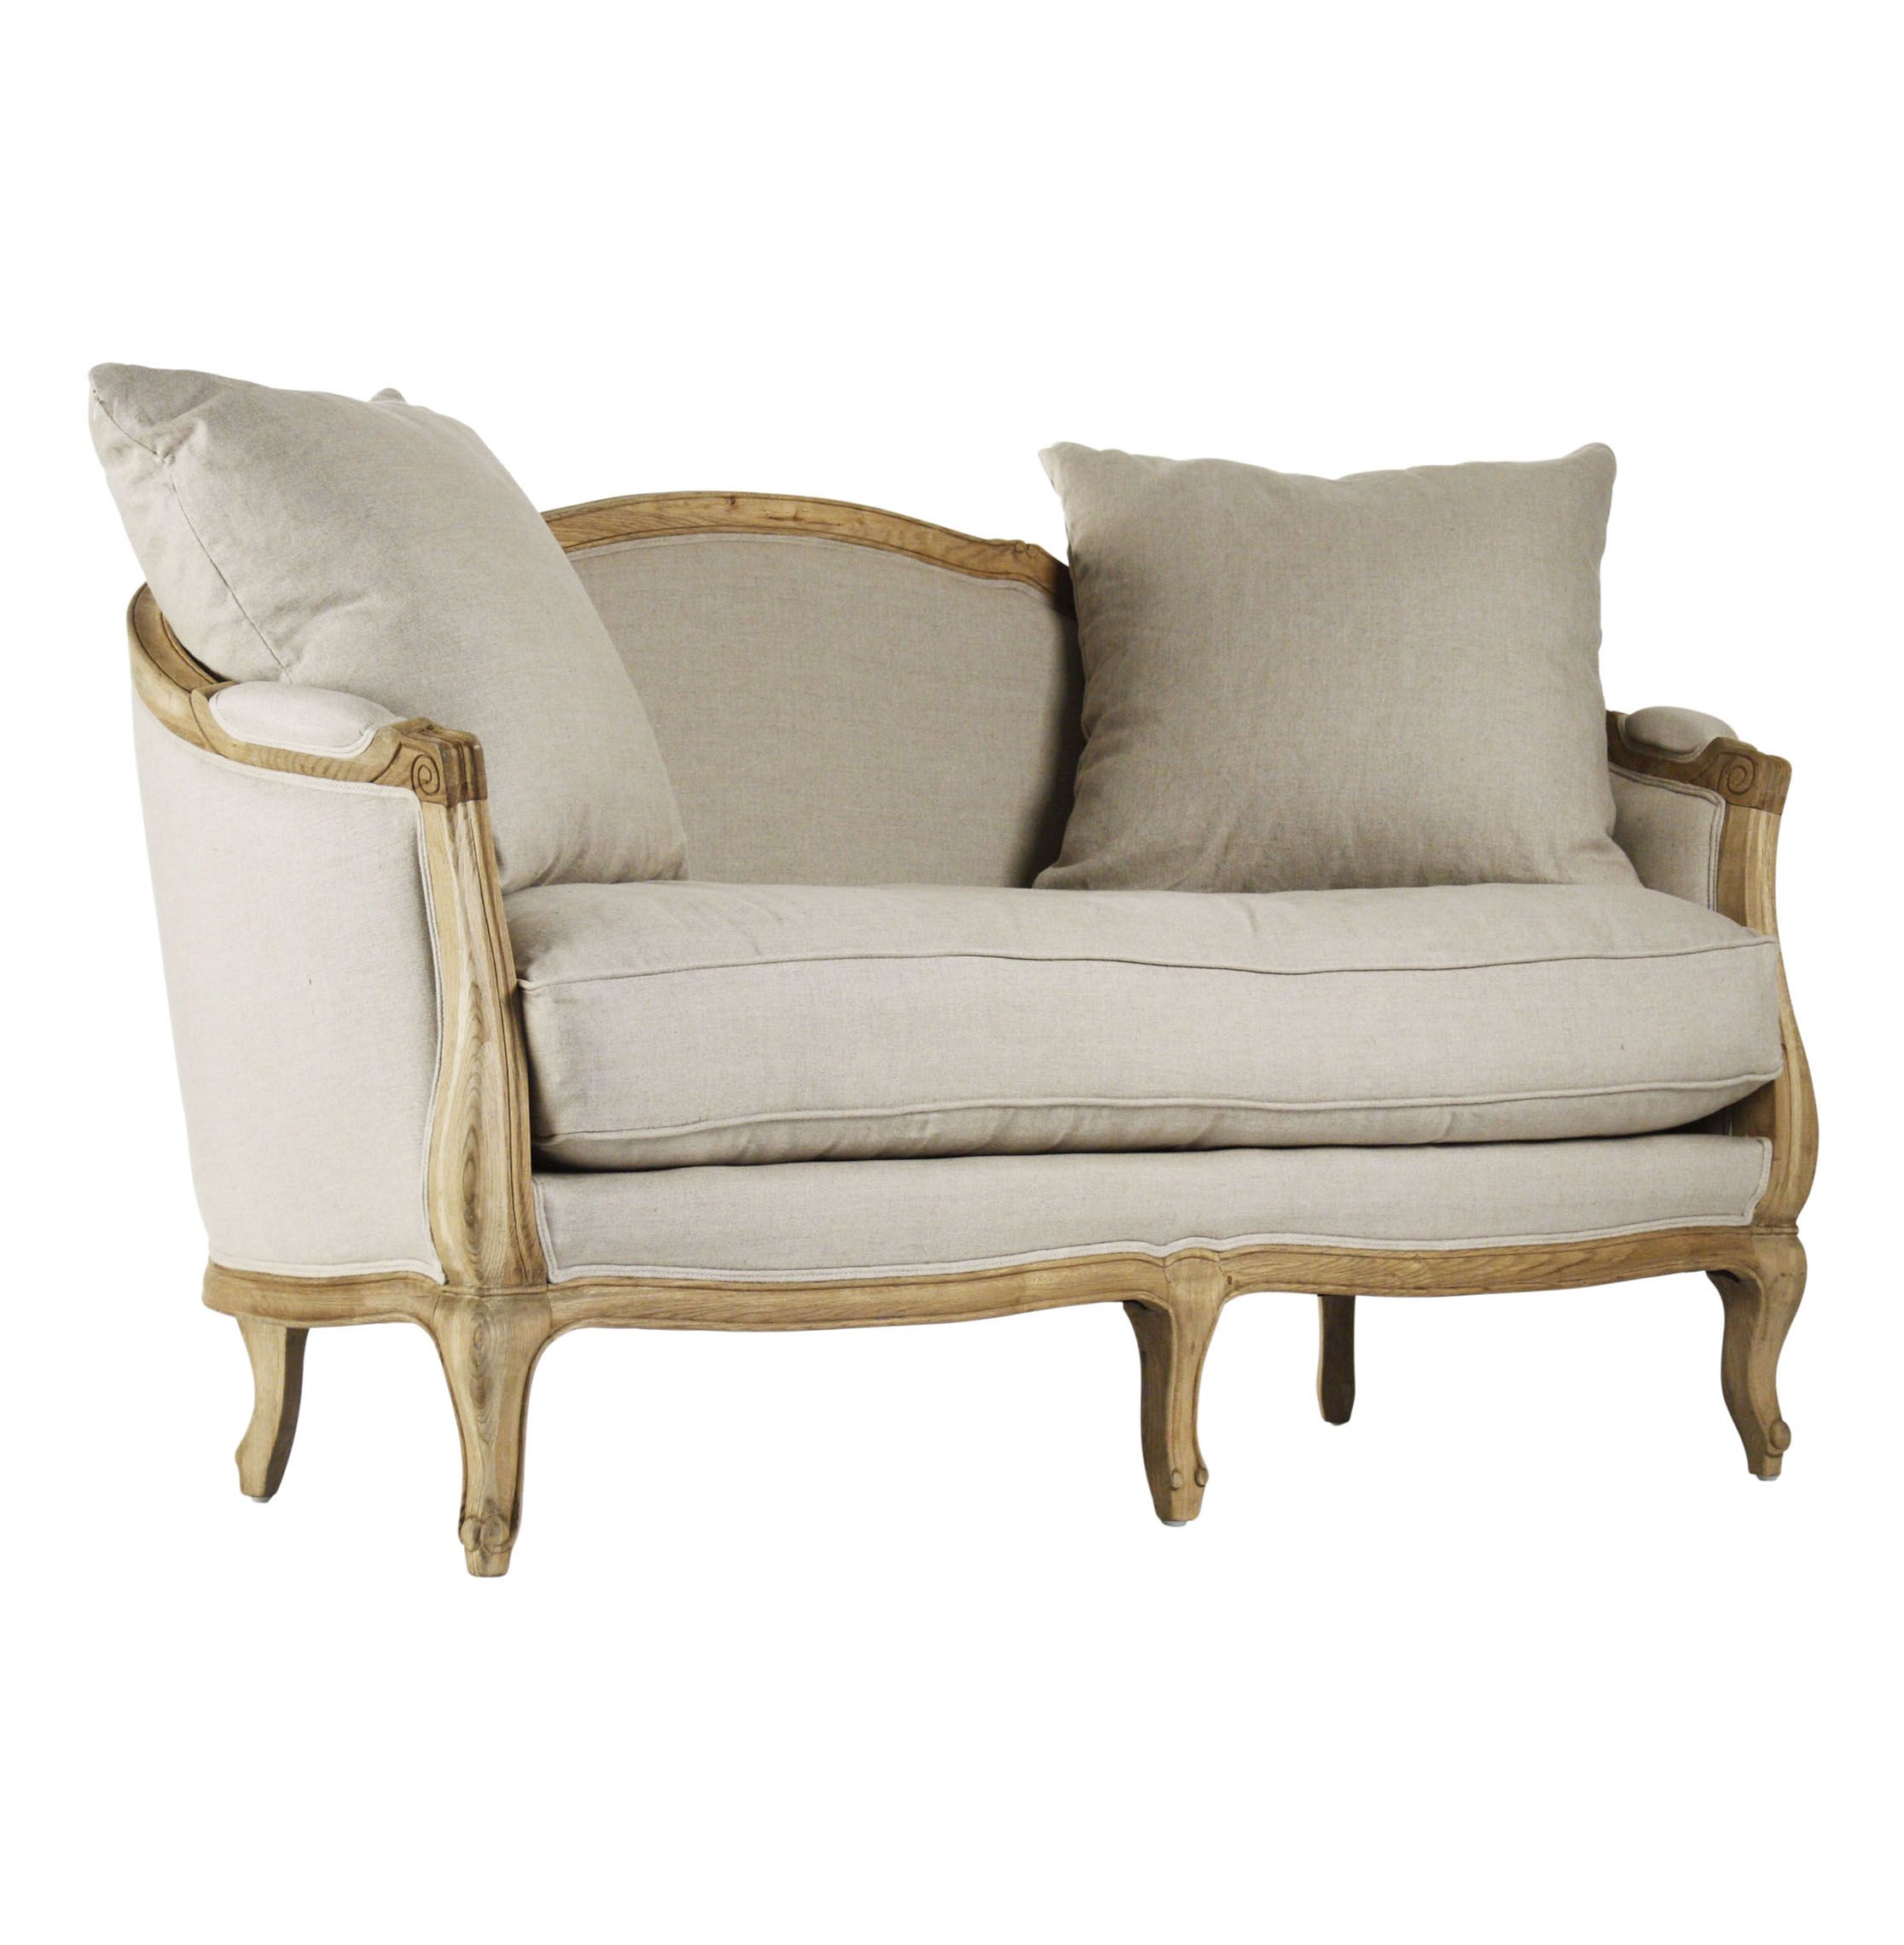 Rue du Bac French Country Natural Linen Feather Settee Loveseat | Kathy Kuo Home